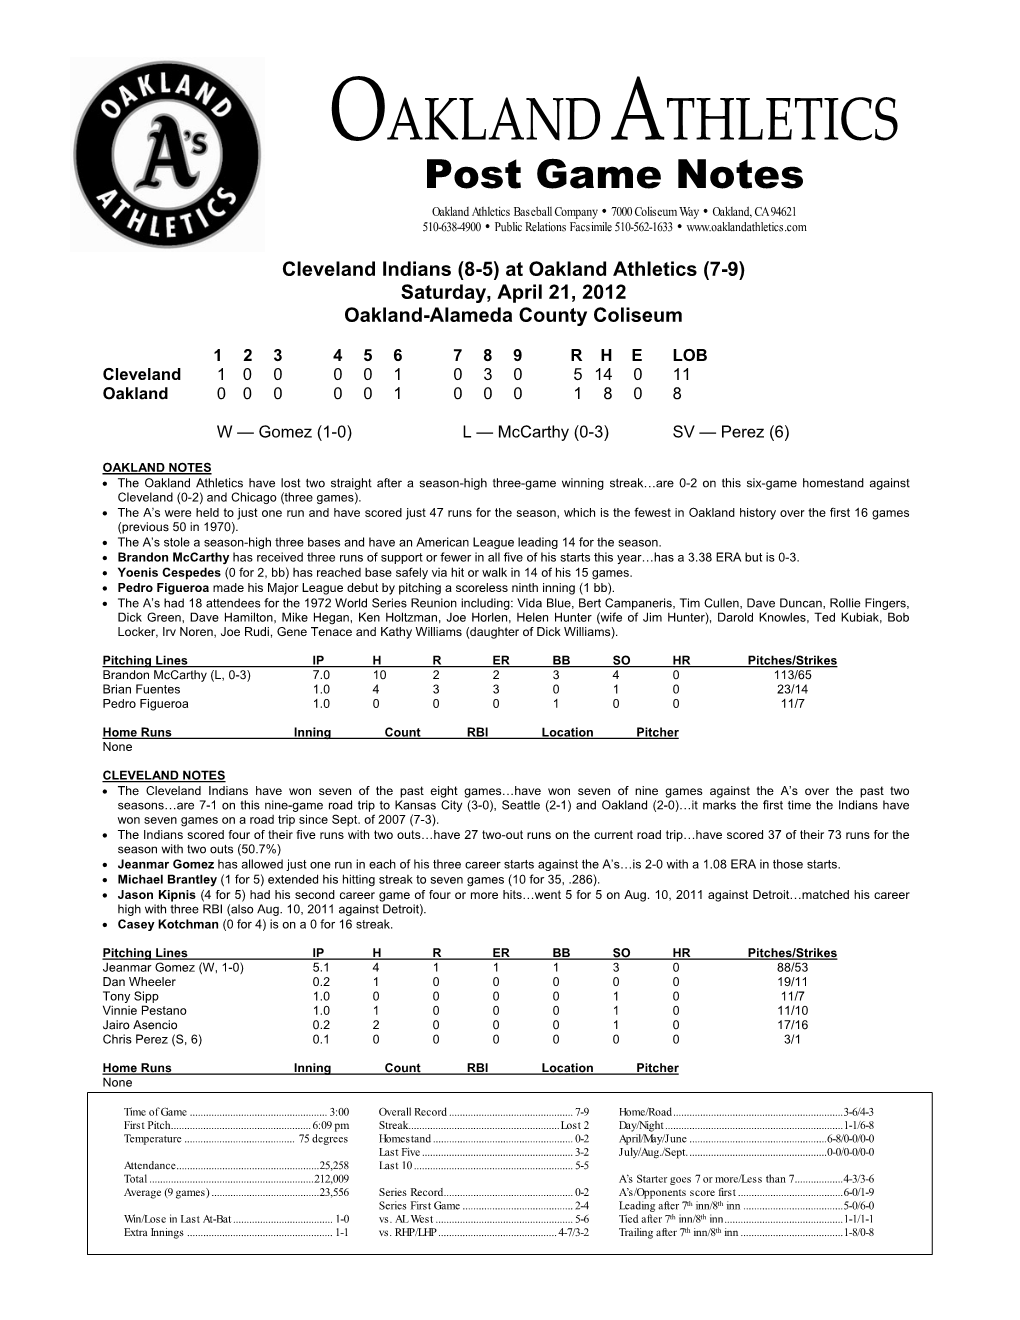 04-21-2012 A's Post Game Notes